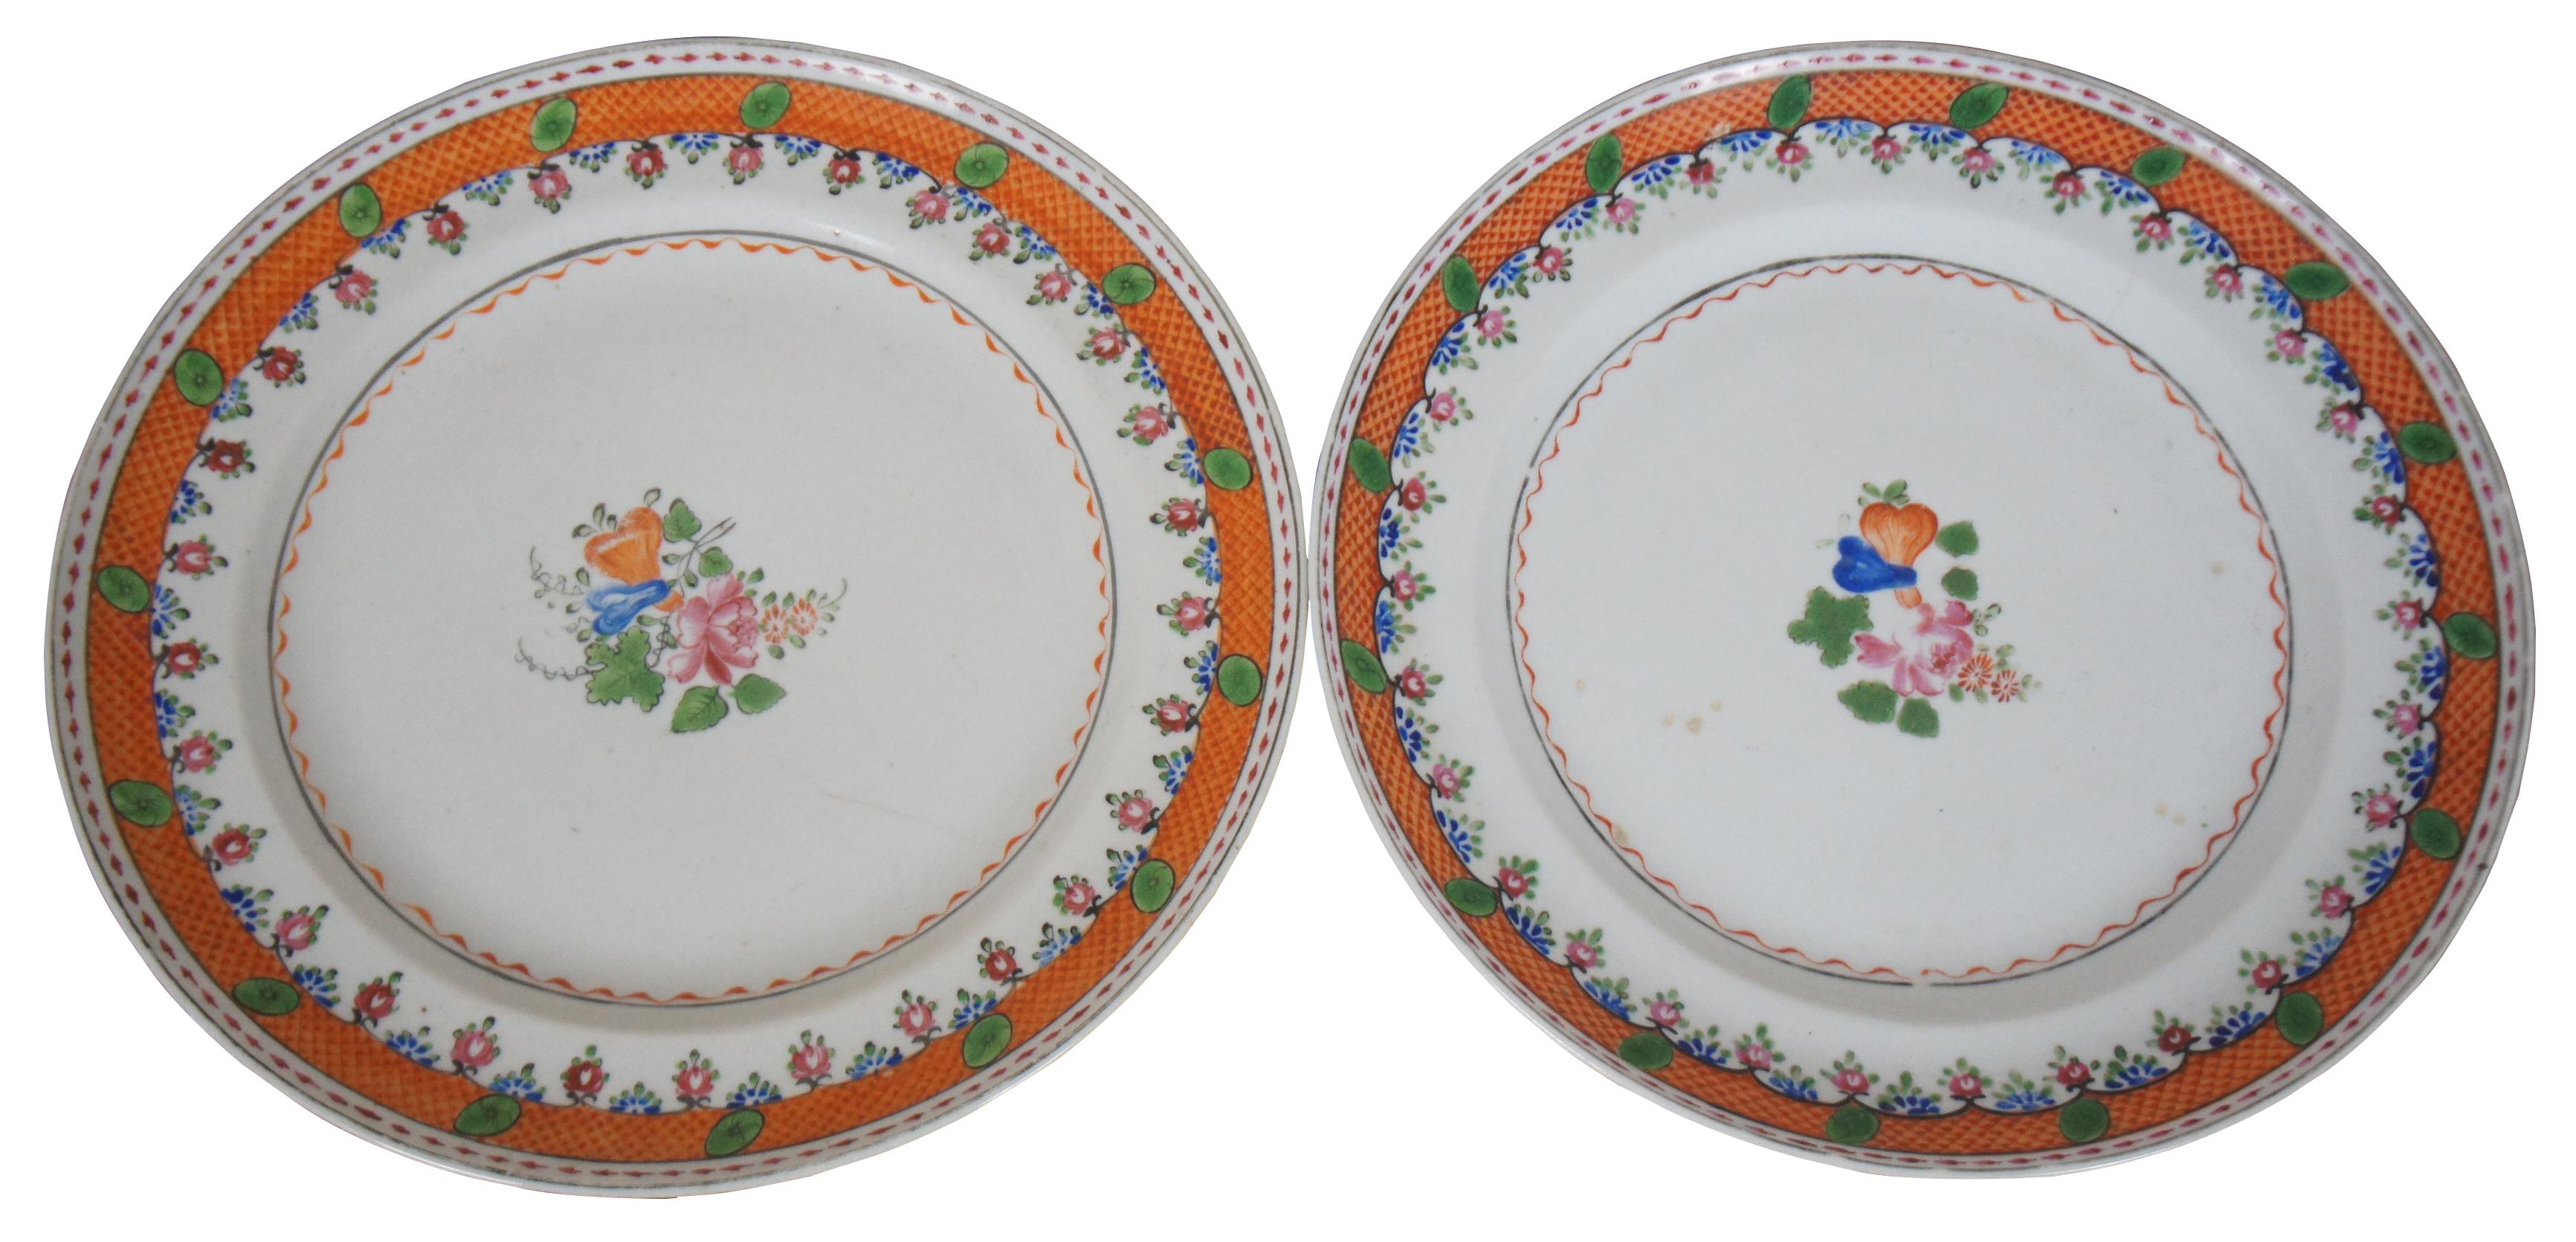 Pair of antique late 18th century to early 19th century Chinese export Qing (Qianlong Period, circa 1780) porcelain dinner plates with hand painted famille and lattice motifs. Measure: 10